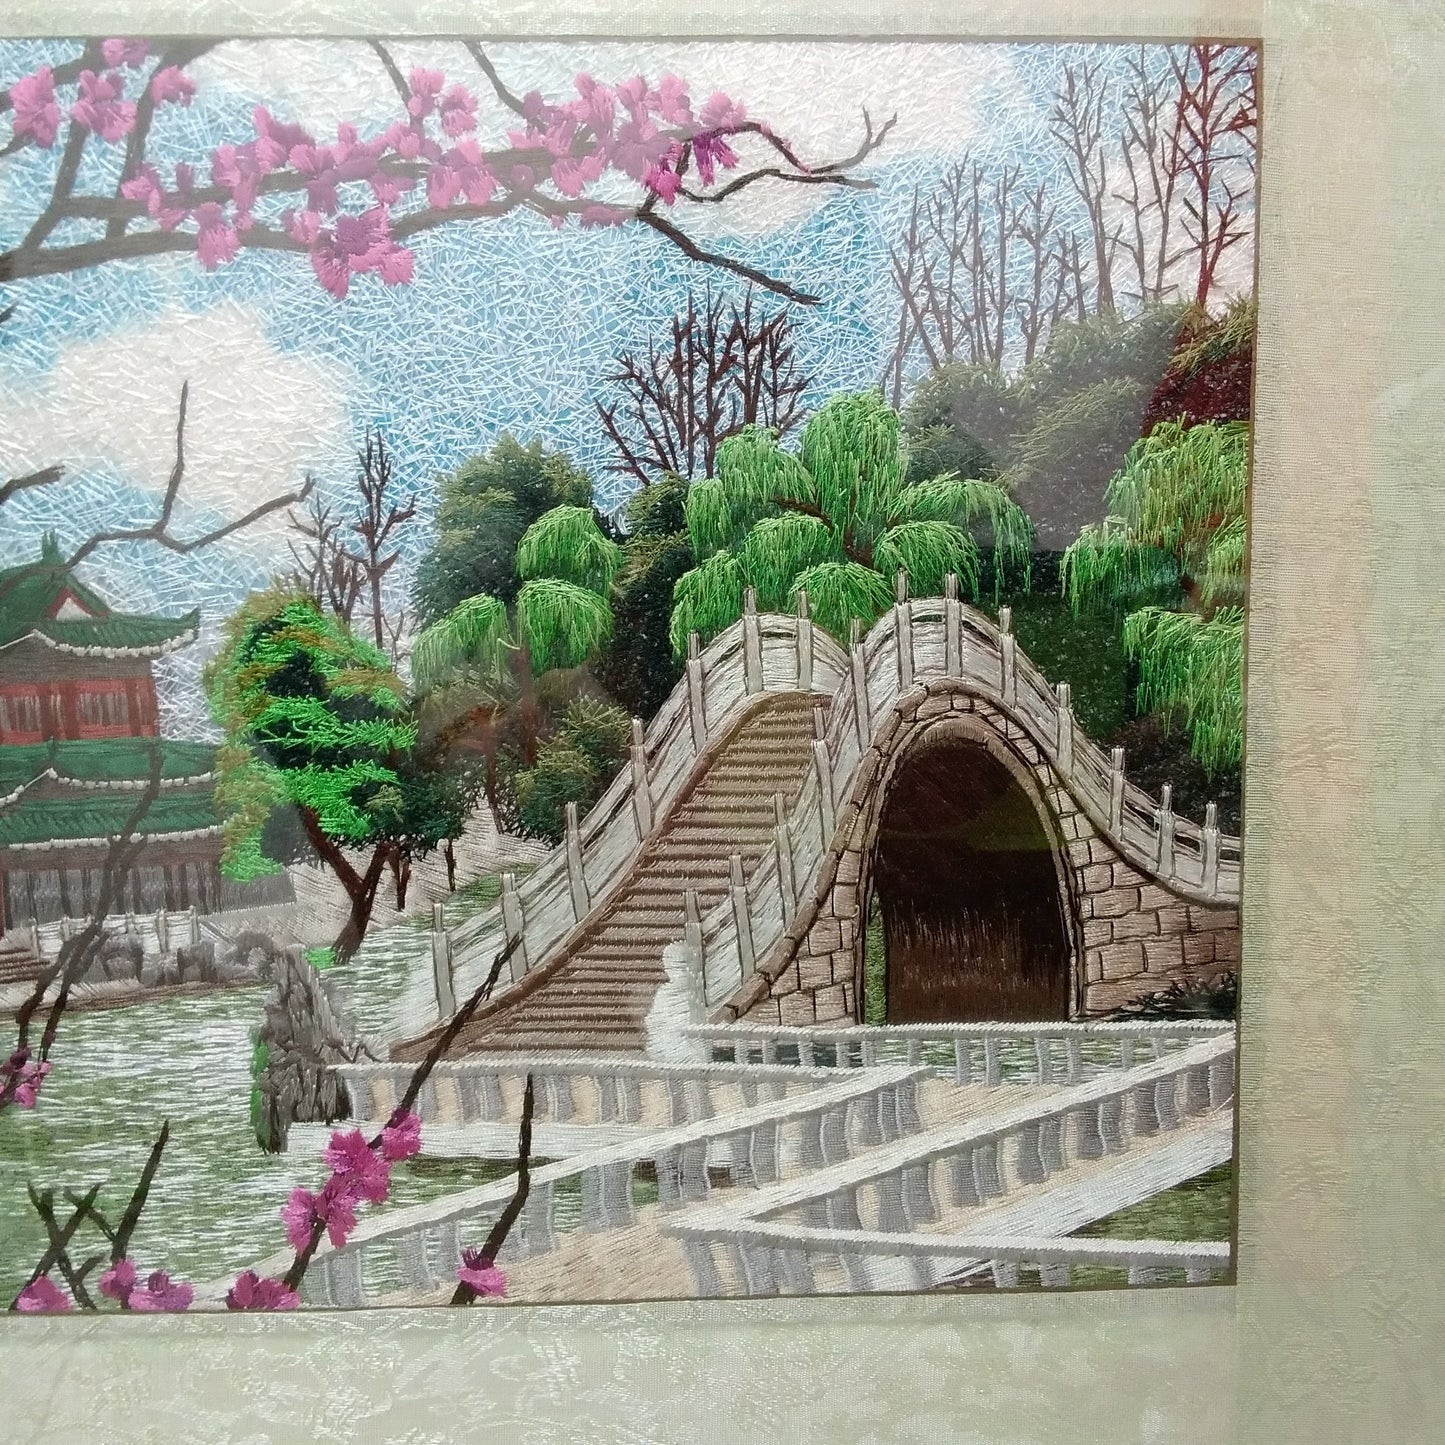 Antique Embroidery of Cheng Huang temple at Yu Yuan Park in Shanghai